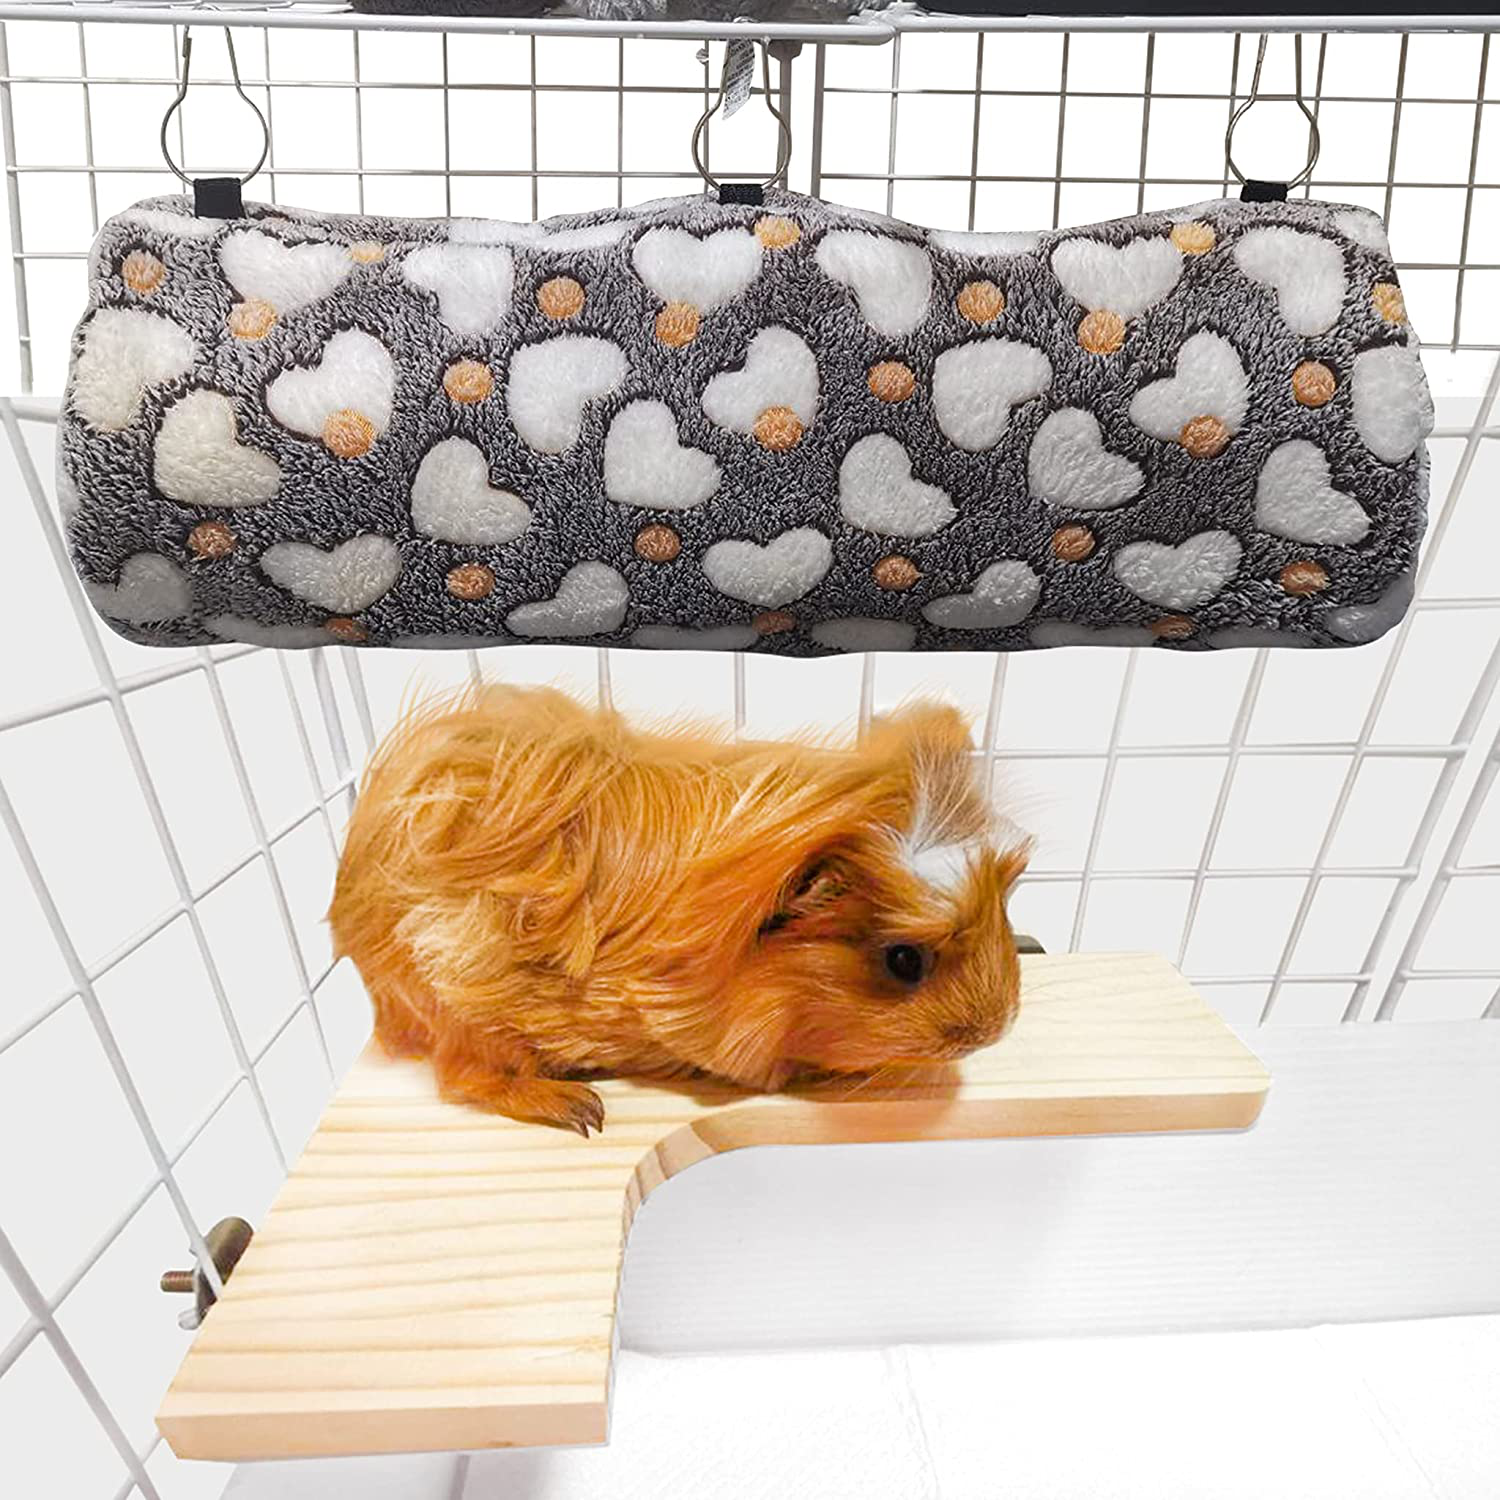 Playcraftz Tunnel Hammock with L-Shape Wood Activity Platforms for Cage Shelves & Wood Perch Ledges for Small Animals Cages and Pets like Hamsters, Mice, Chinchilla, Guinea Pigs, Birds, Rats.